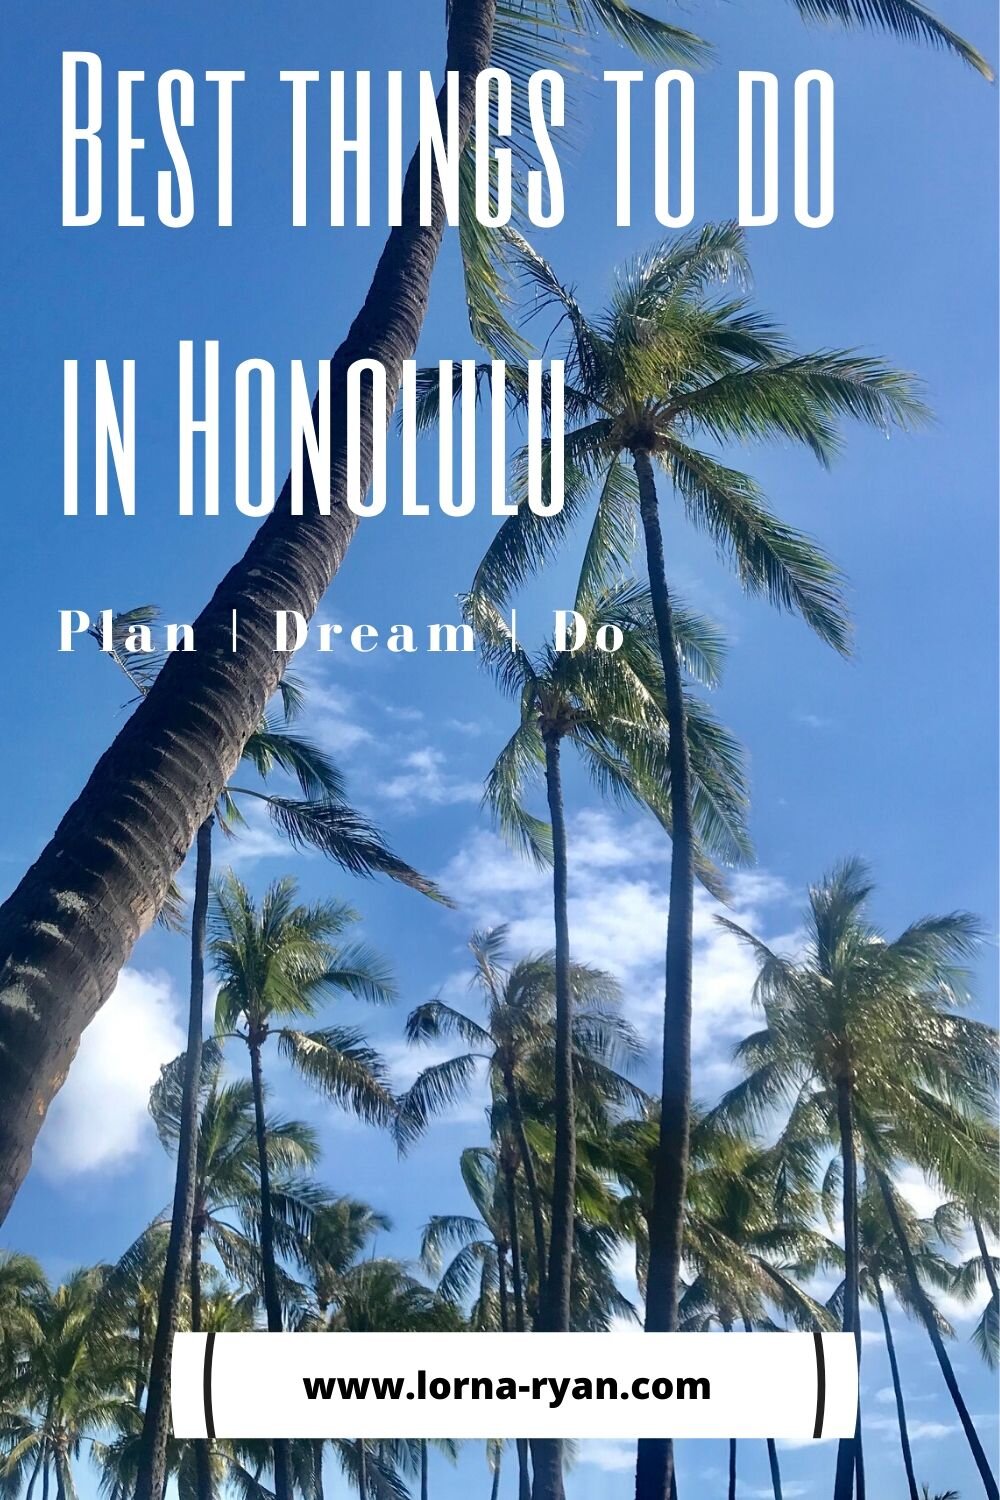 Spend your time wisely with these epic things to do in Honolulu, Hawaii on your trip to Oahu. Includes history, culture & adventure. Plus planning tips! #hawaii #honolulu #bestthingsinhawaii